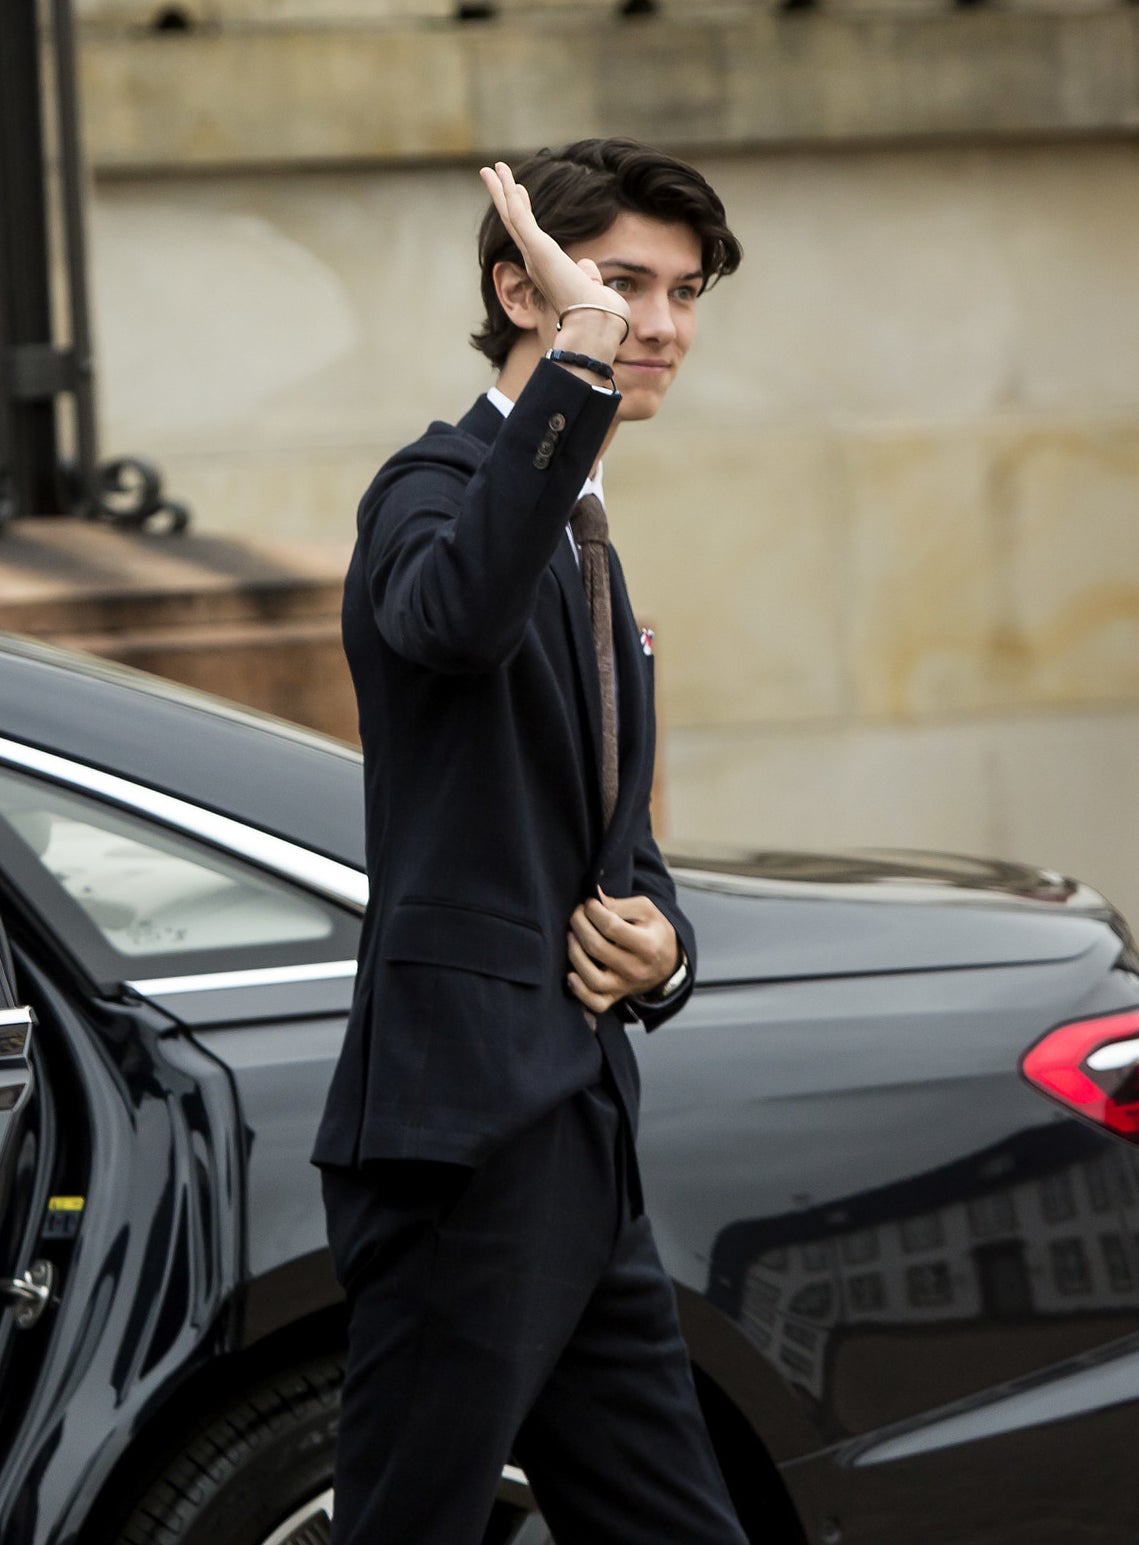 Prince Felix arrives to Fredensborg Palace Christian to participate in celebration of Prince Christian of Denmark on the occasion of his confirmation on May 15, 2021 in Fredensborg, Denmark